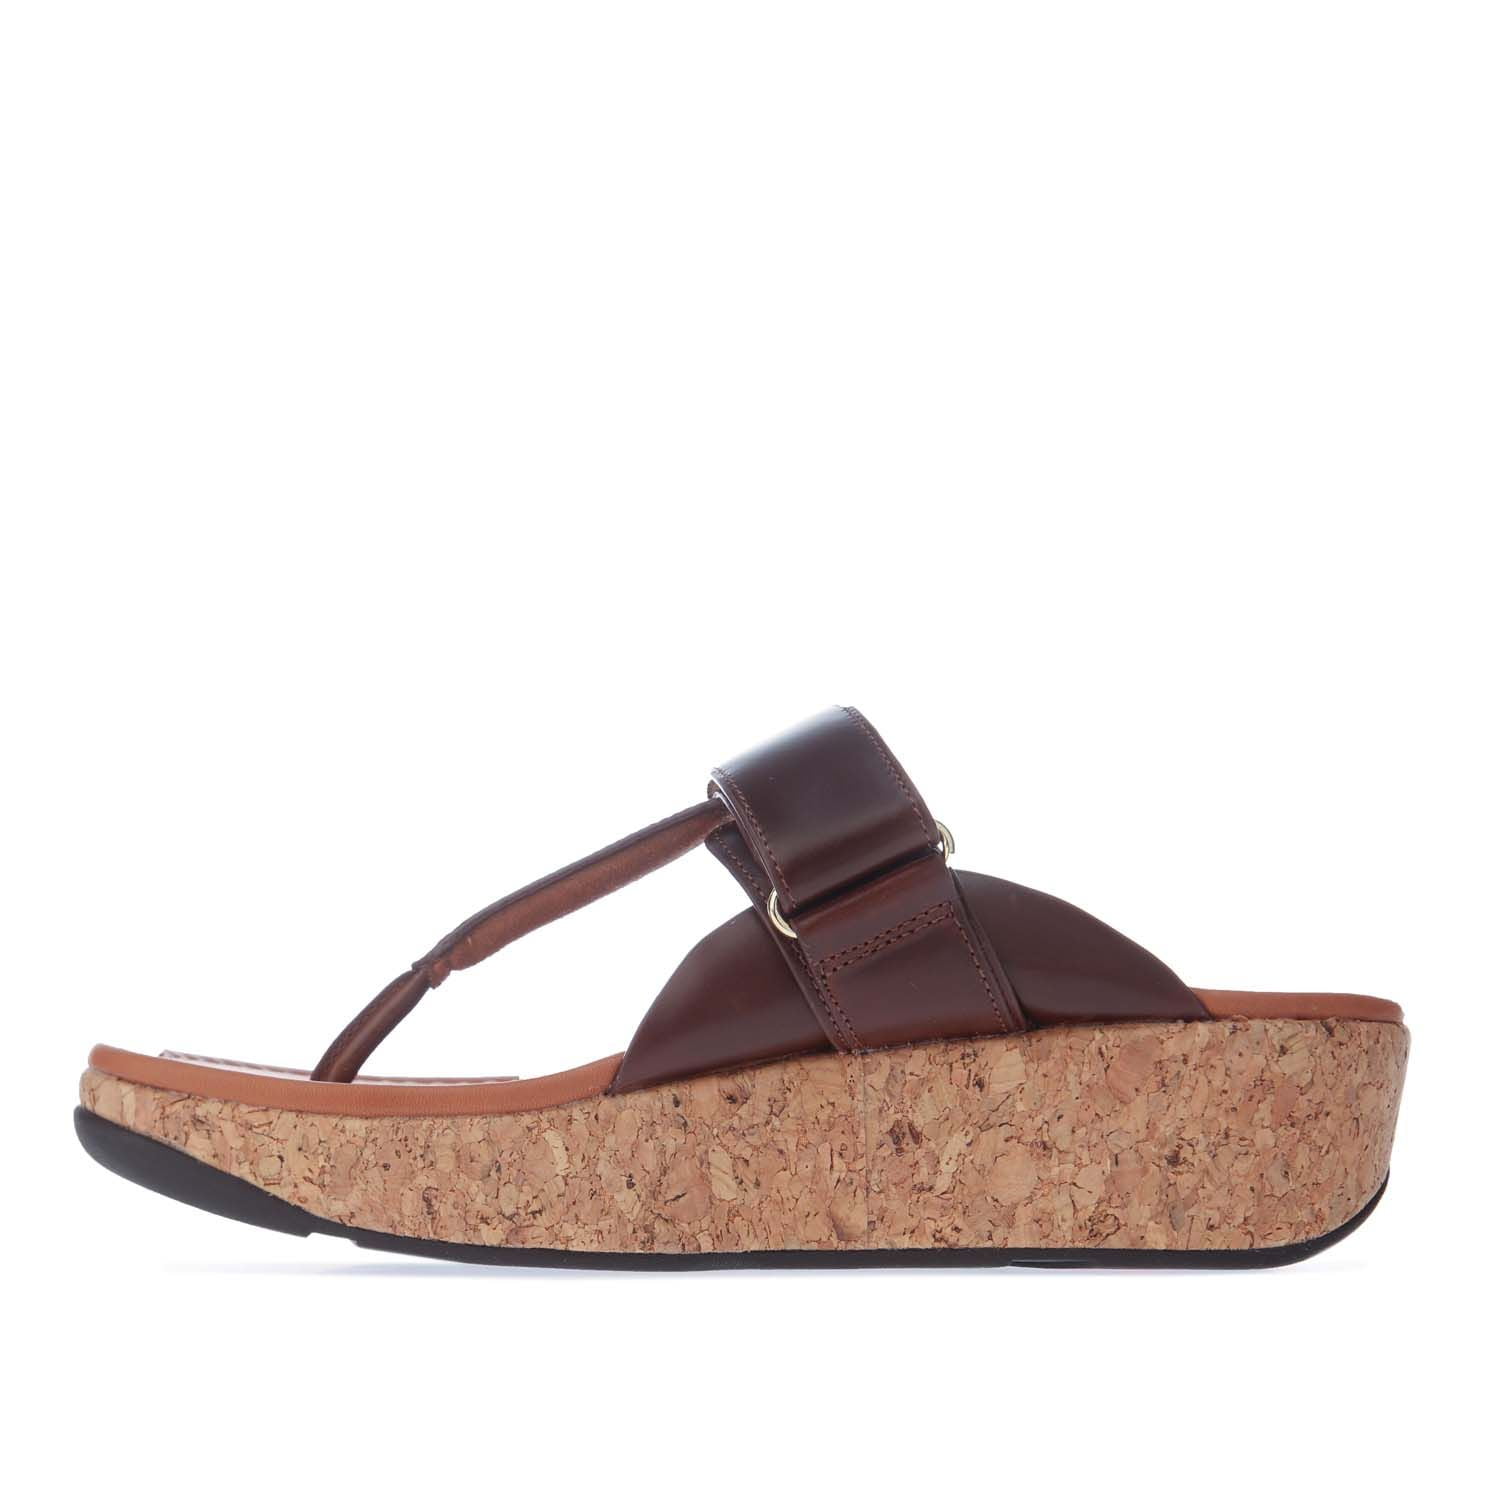 Fitflop Remi Chocolate Brown Leather Adjustable Toe Post Sandals